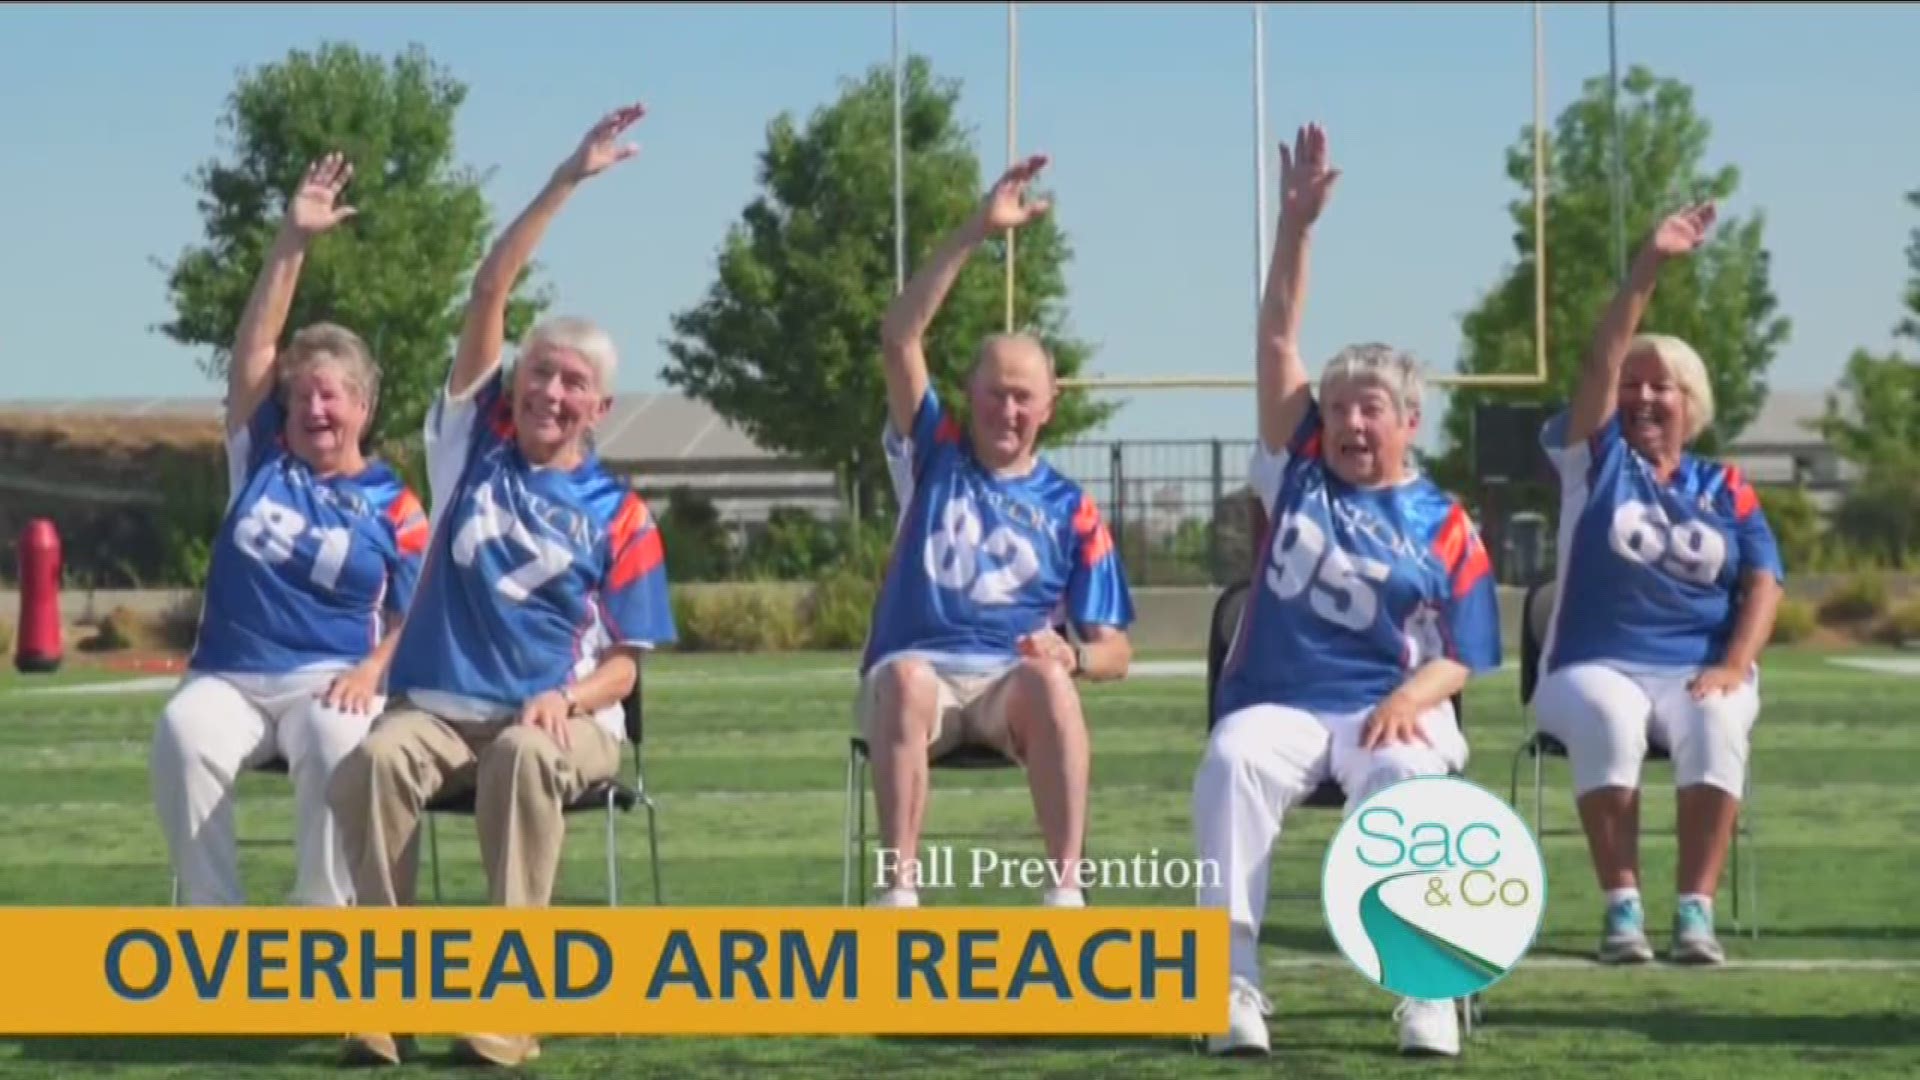 See how Eskaton is preventing Fall Prevention with their fun, yet beneficial workout routine!